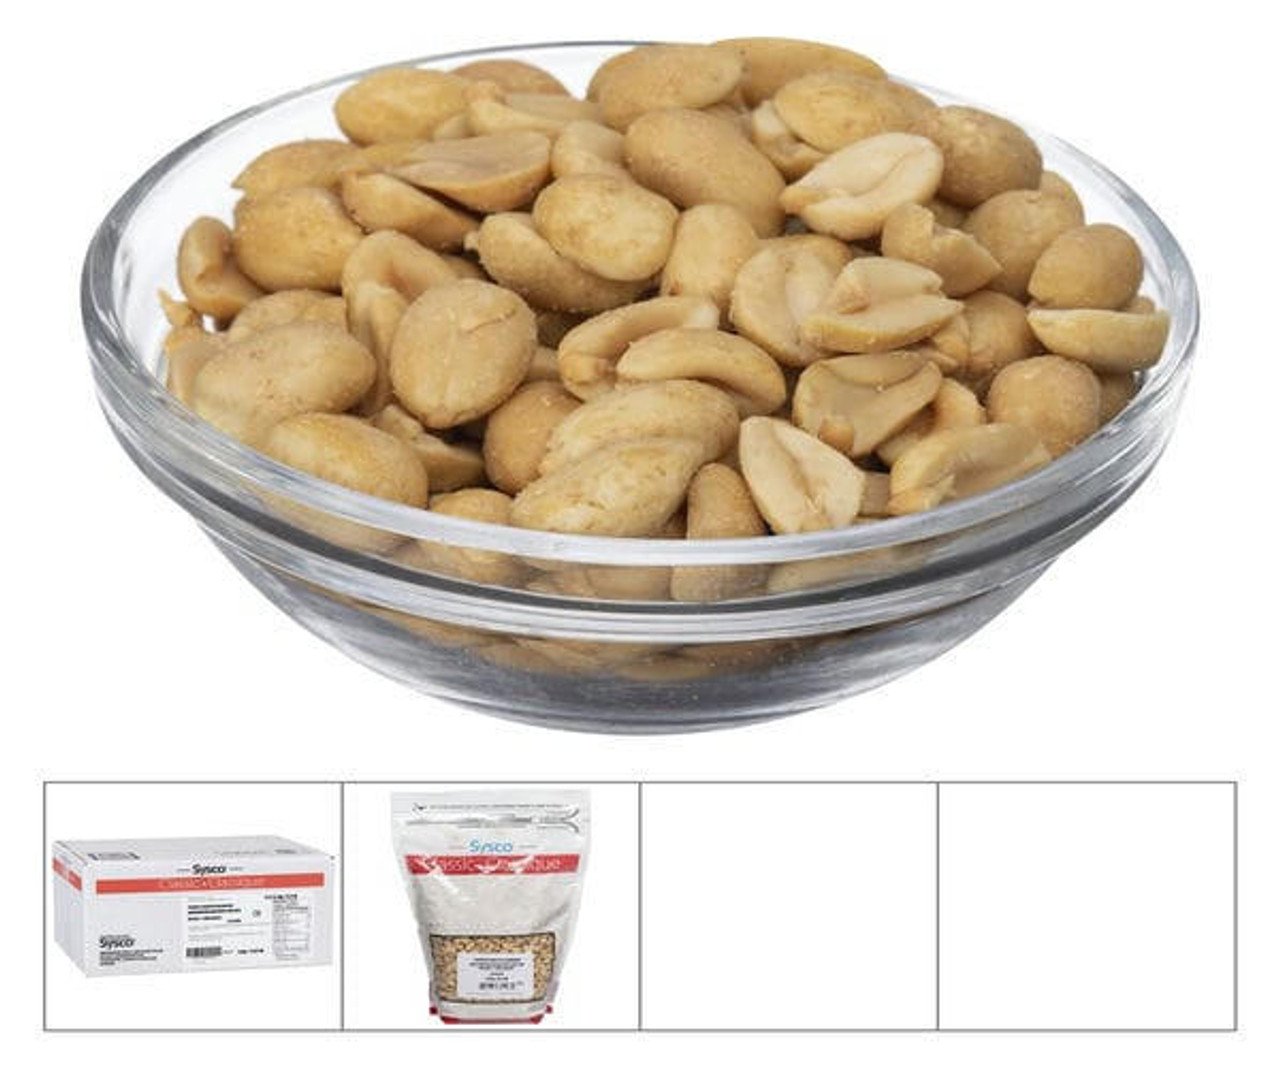  Sysco Classic Peanut Blanched Roasted No Salt 1.5KG/3.31 LBS Bulk size (2/Case) 